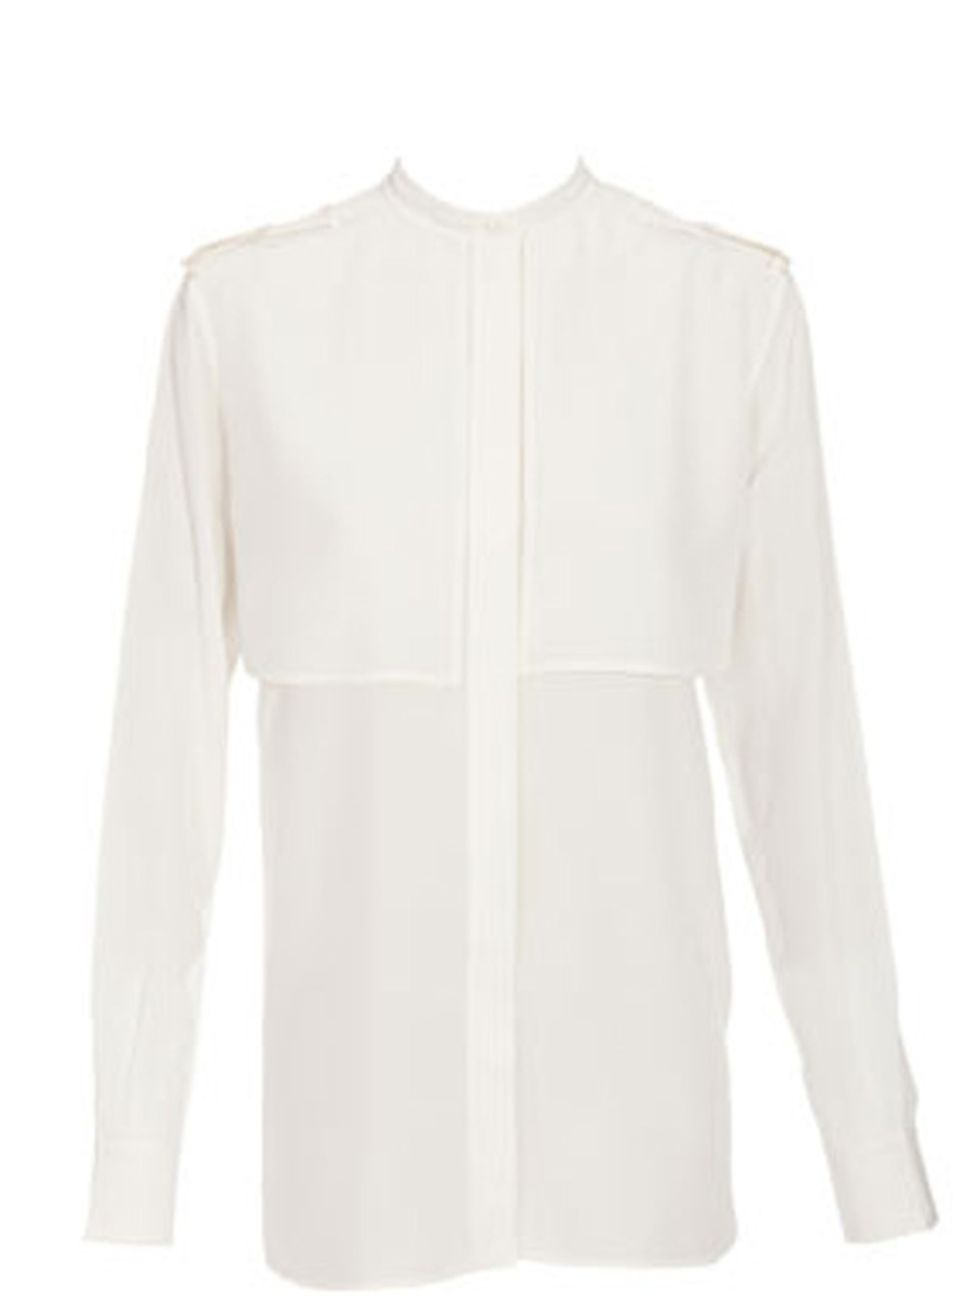 <p>Celine panelled blouse, £785.00, available at <a href="http://www.brownsfashion.com/product/012918520003.htm?siteid=Hy3bqNL2jtQ-.rQfaNpkioI6Rmu7mf189A">Browns</a></p>